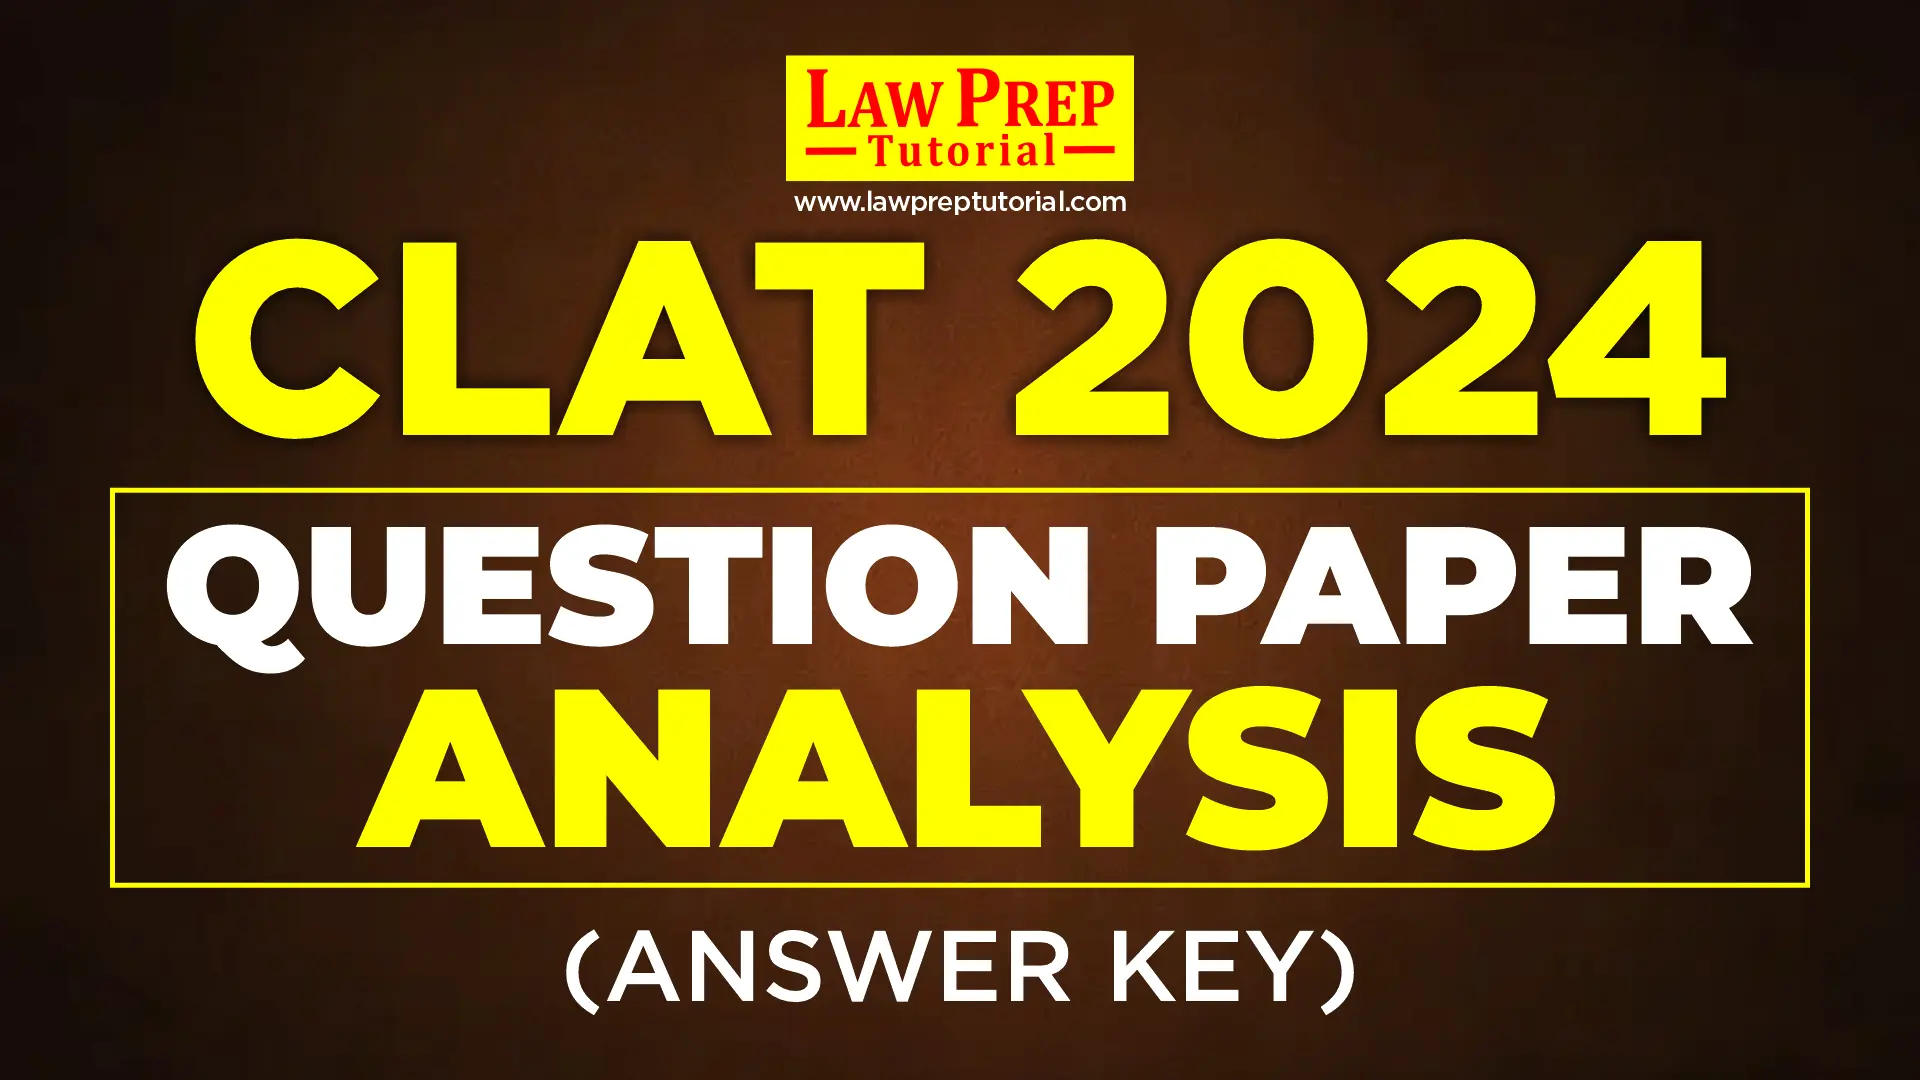 CLAT 2024 Question Paper Analysis